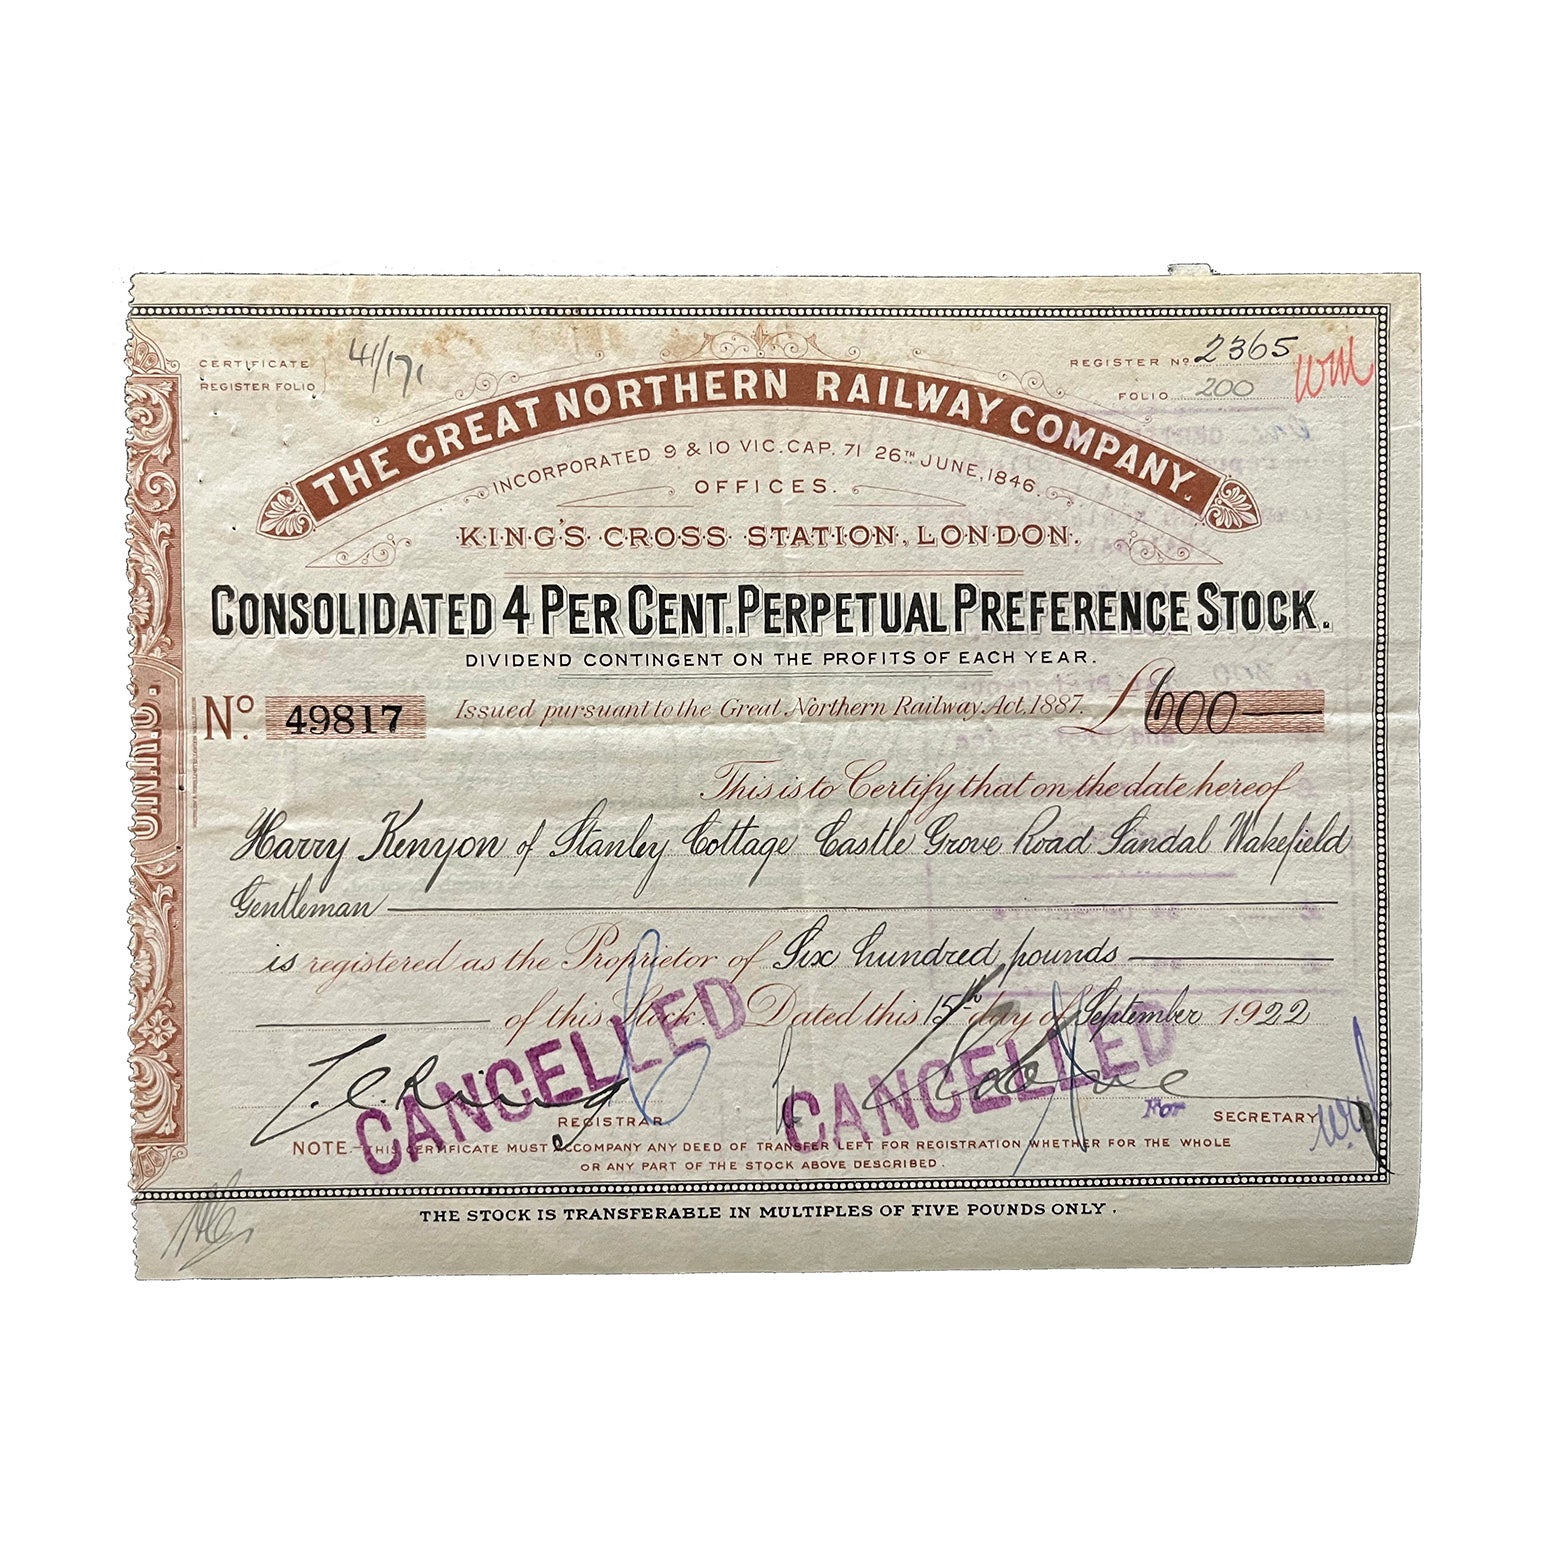 Original railway share certificate, Great Northern Railway Company, Consolidated 4% Perpetual Preference Stock, £600, issued 1922.